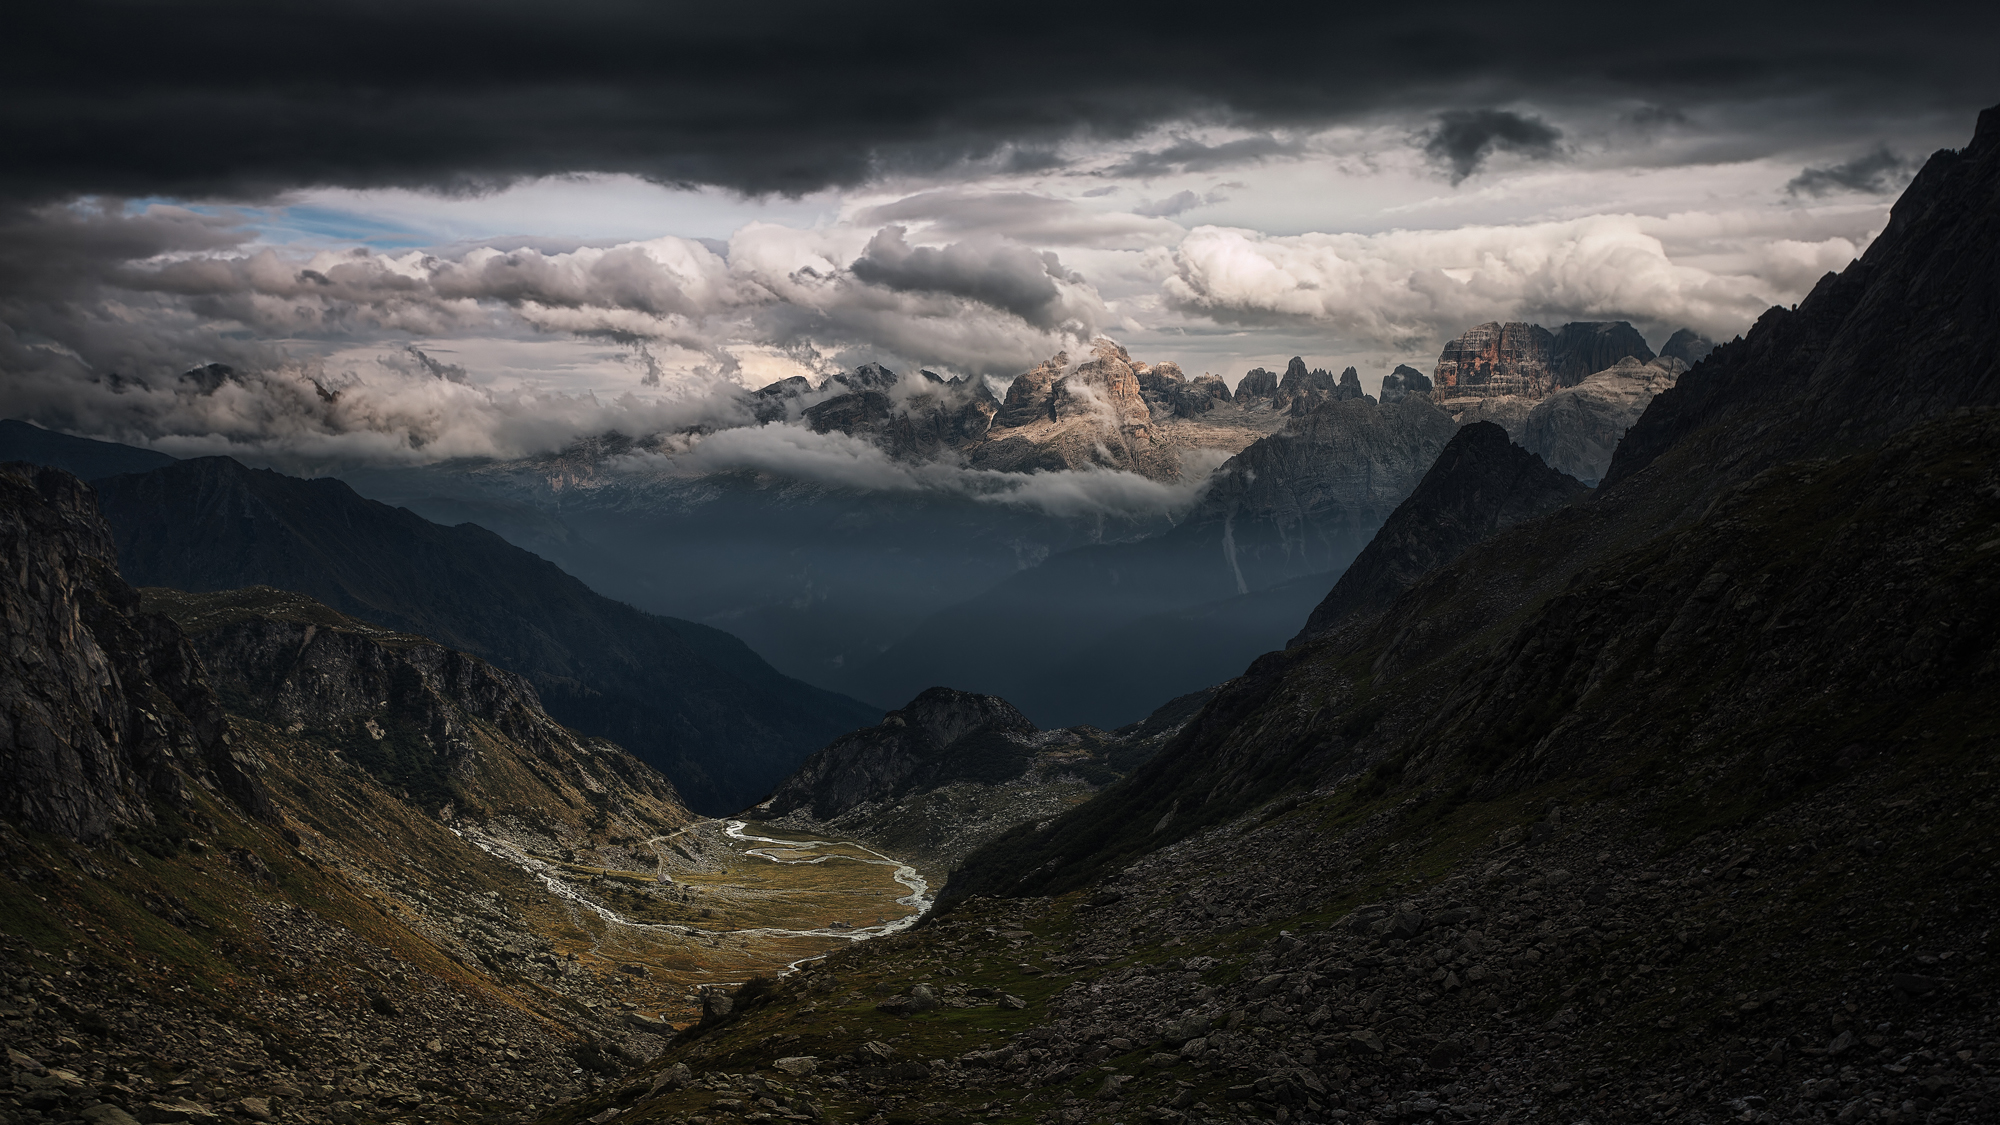 Stefano%20Guerrini%2C%20Italy%2C%20Commended%2C%20Open%2C%20Panoramic%2C2016%20Sony%20World%20Photography%20Awards.jpg